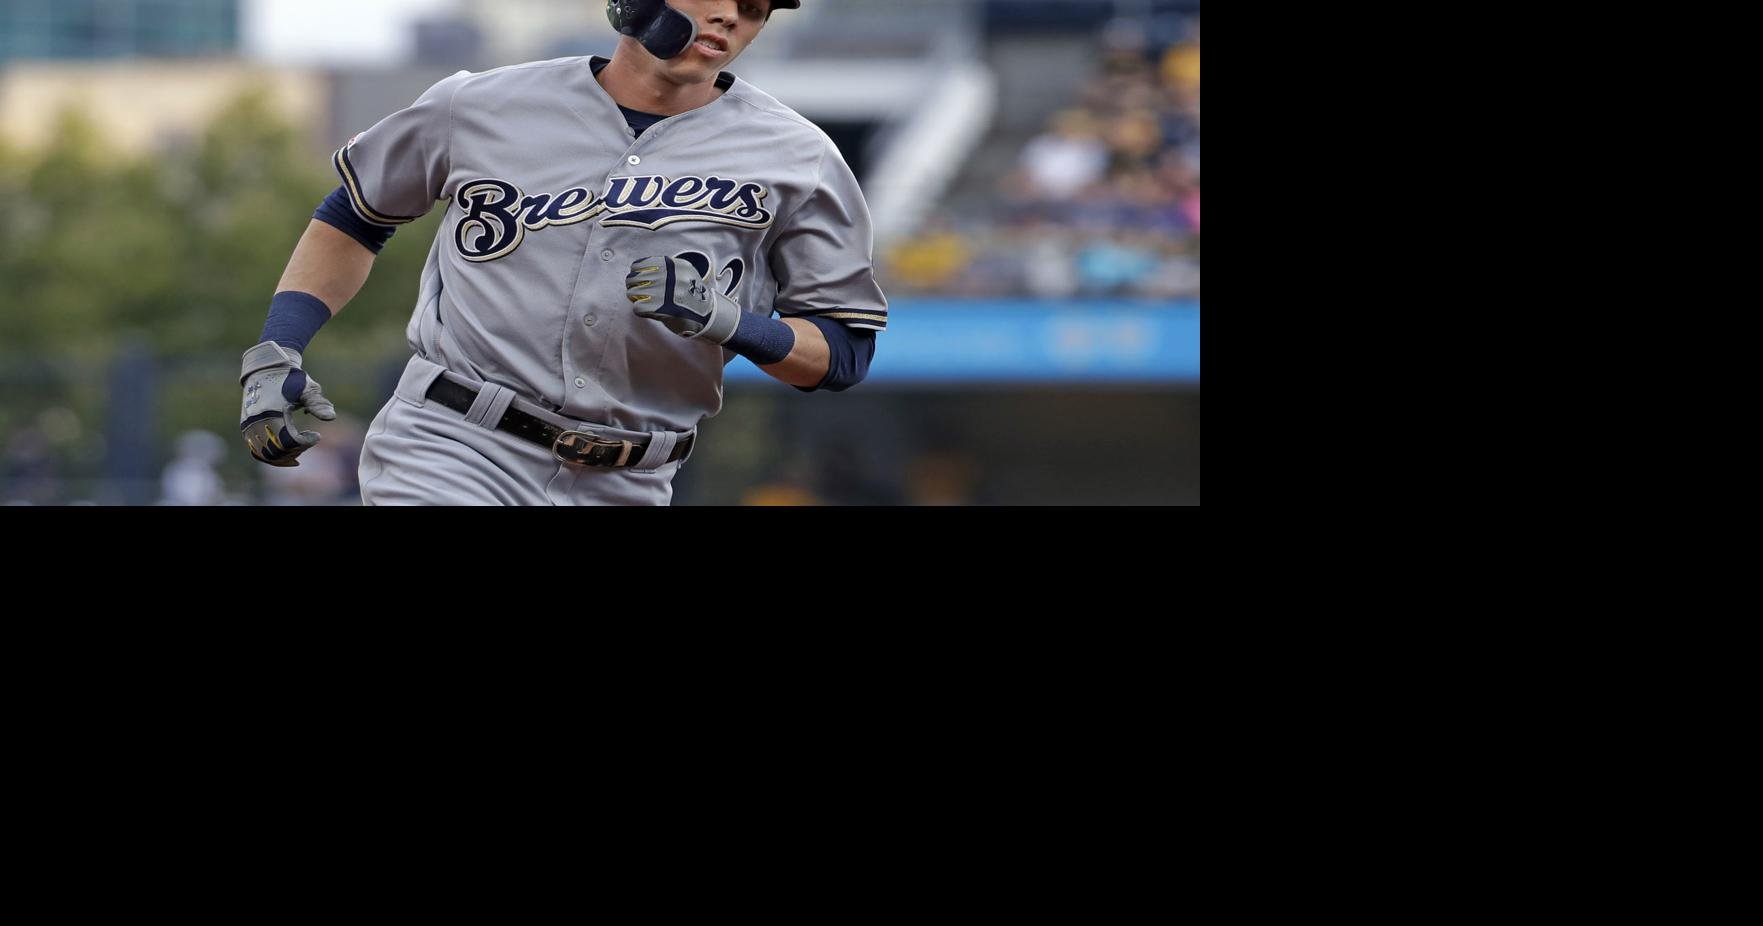 Marlins trade Christian Yelich to Brewers - MLB Daily Dish